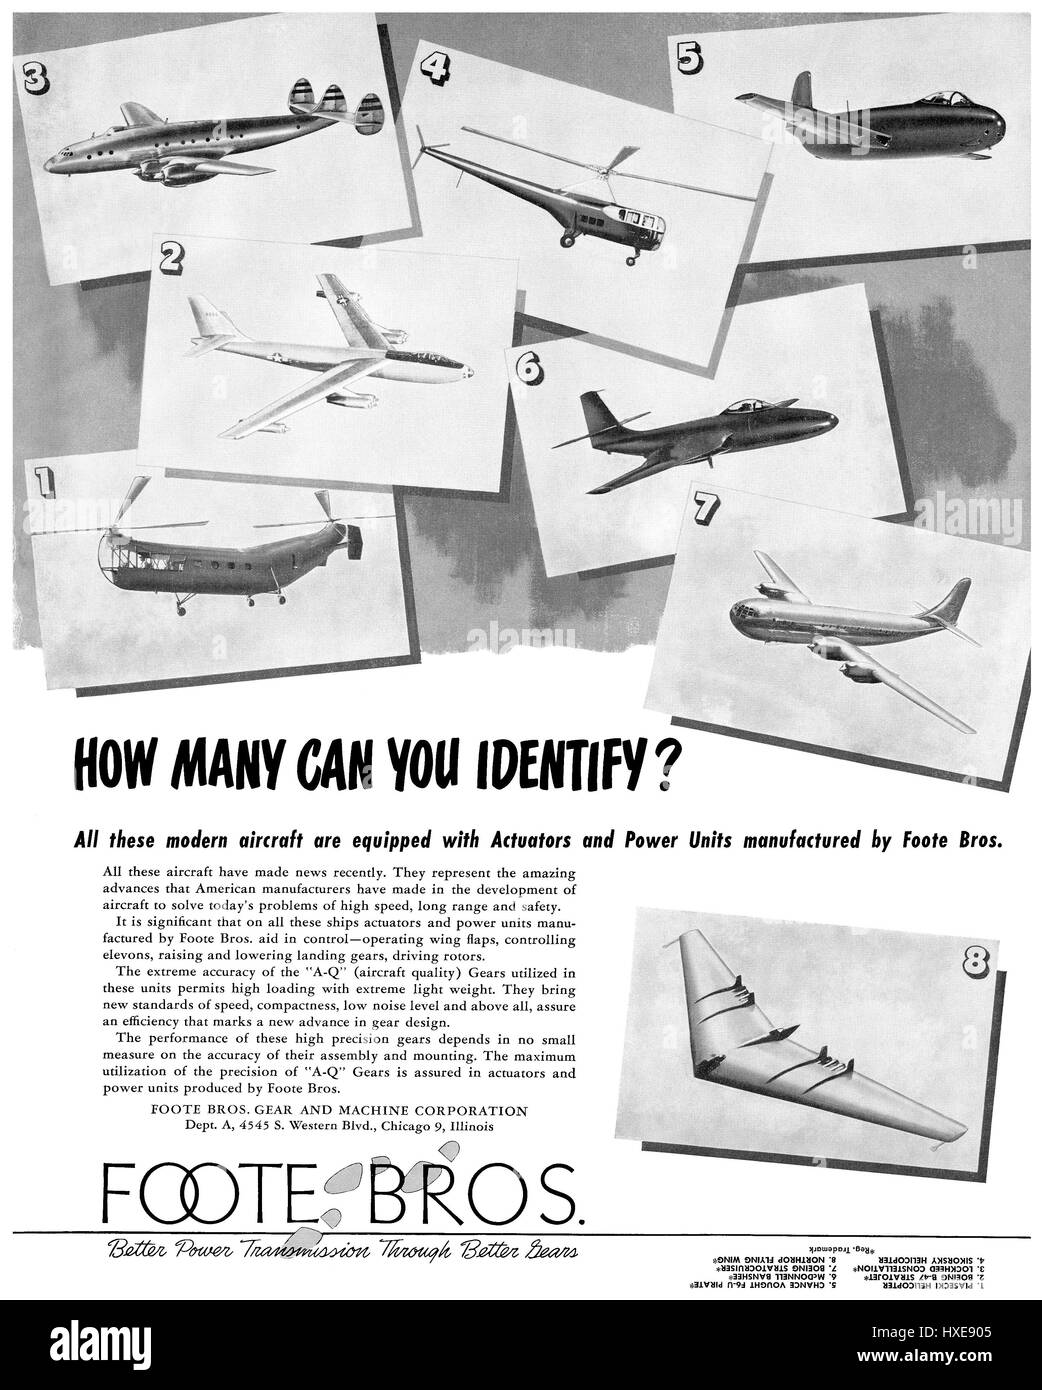 1949 U.S. advertisement for Foote Bros. engineering. Stock Photo